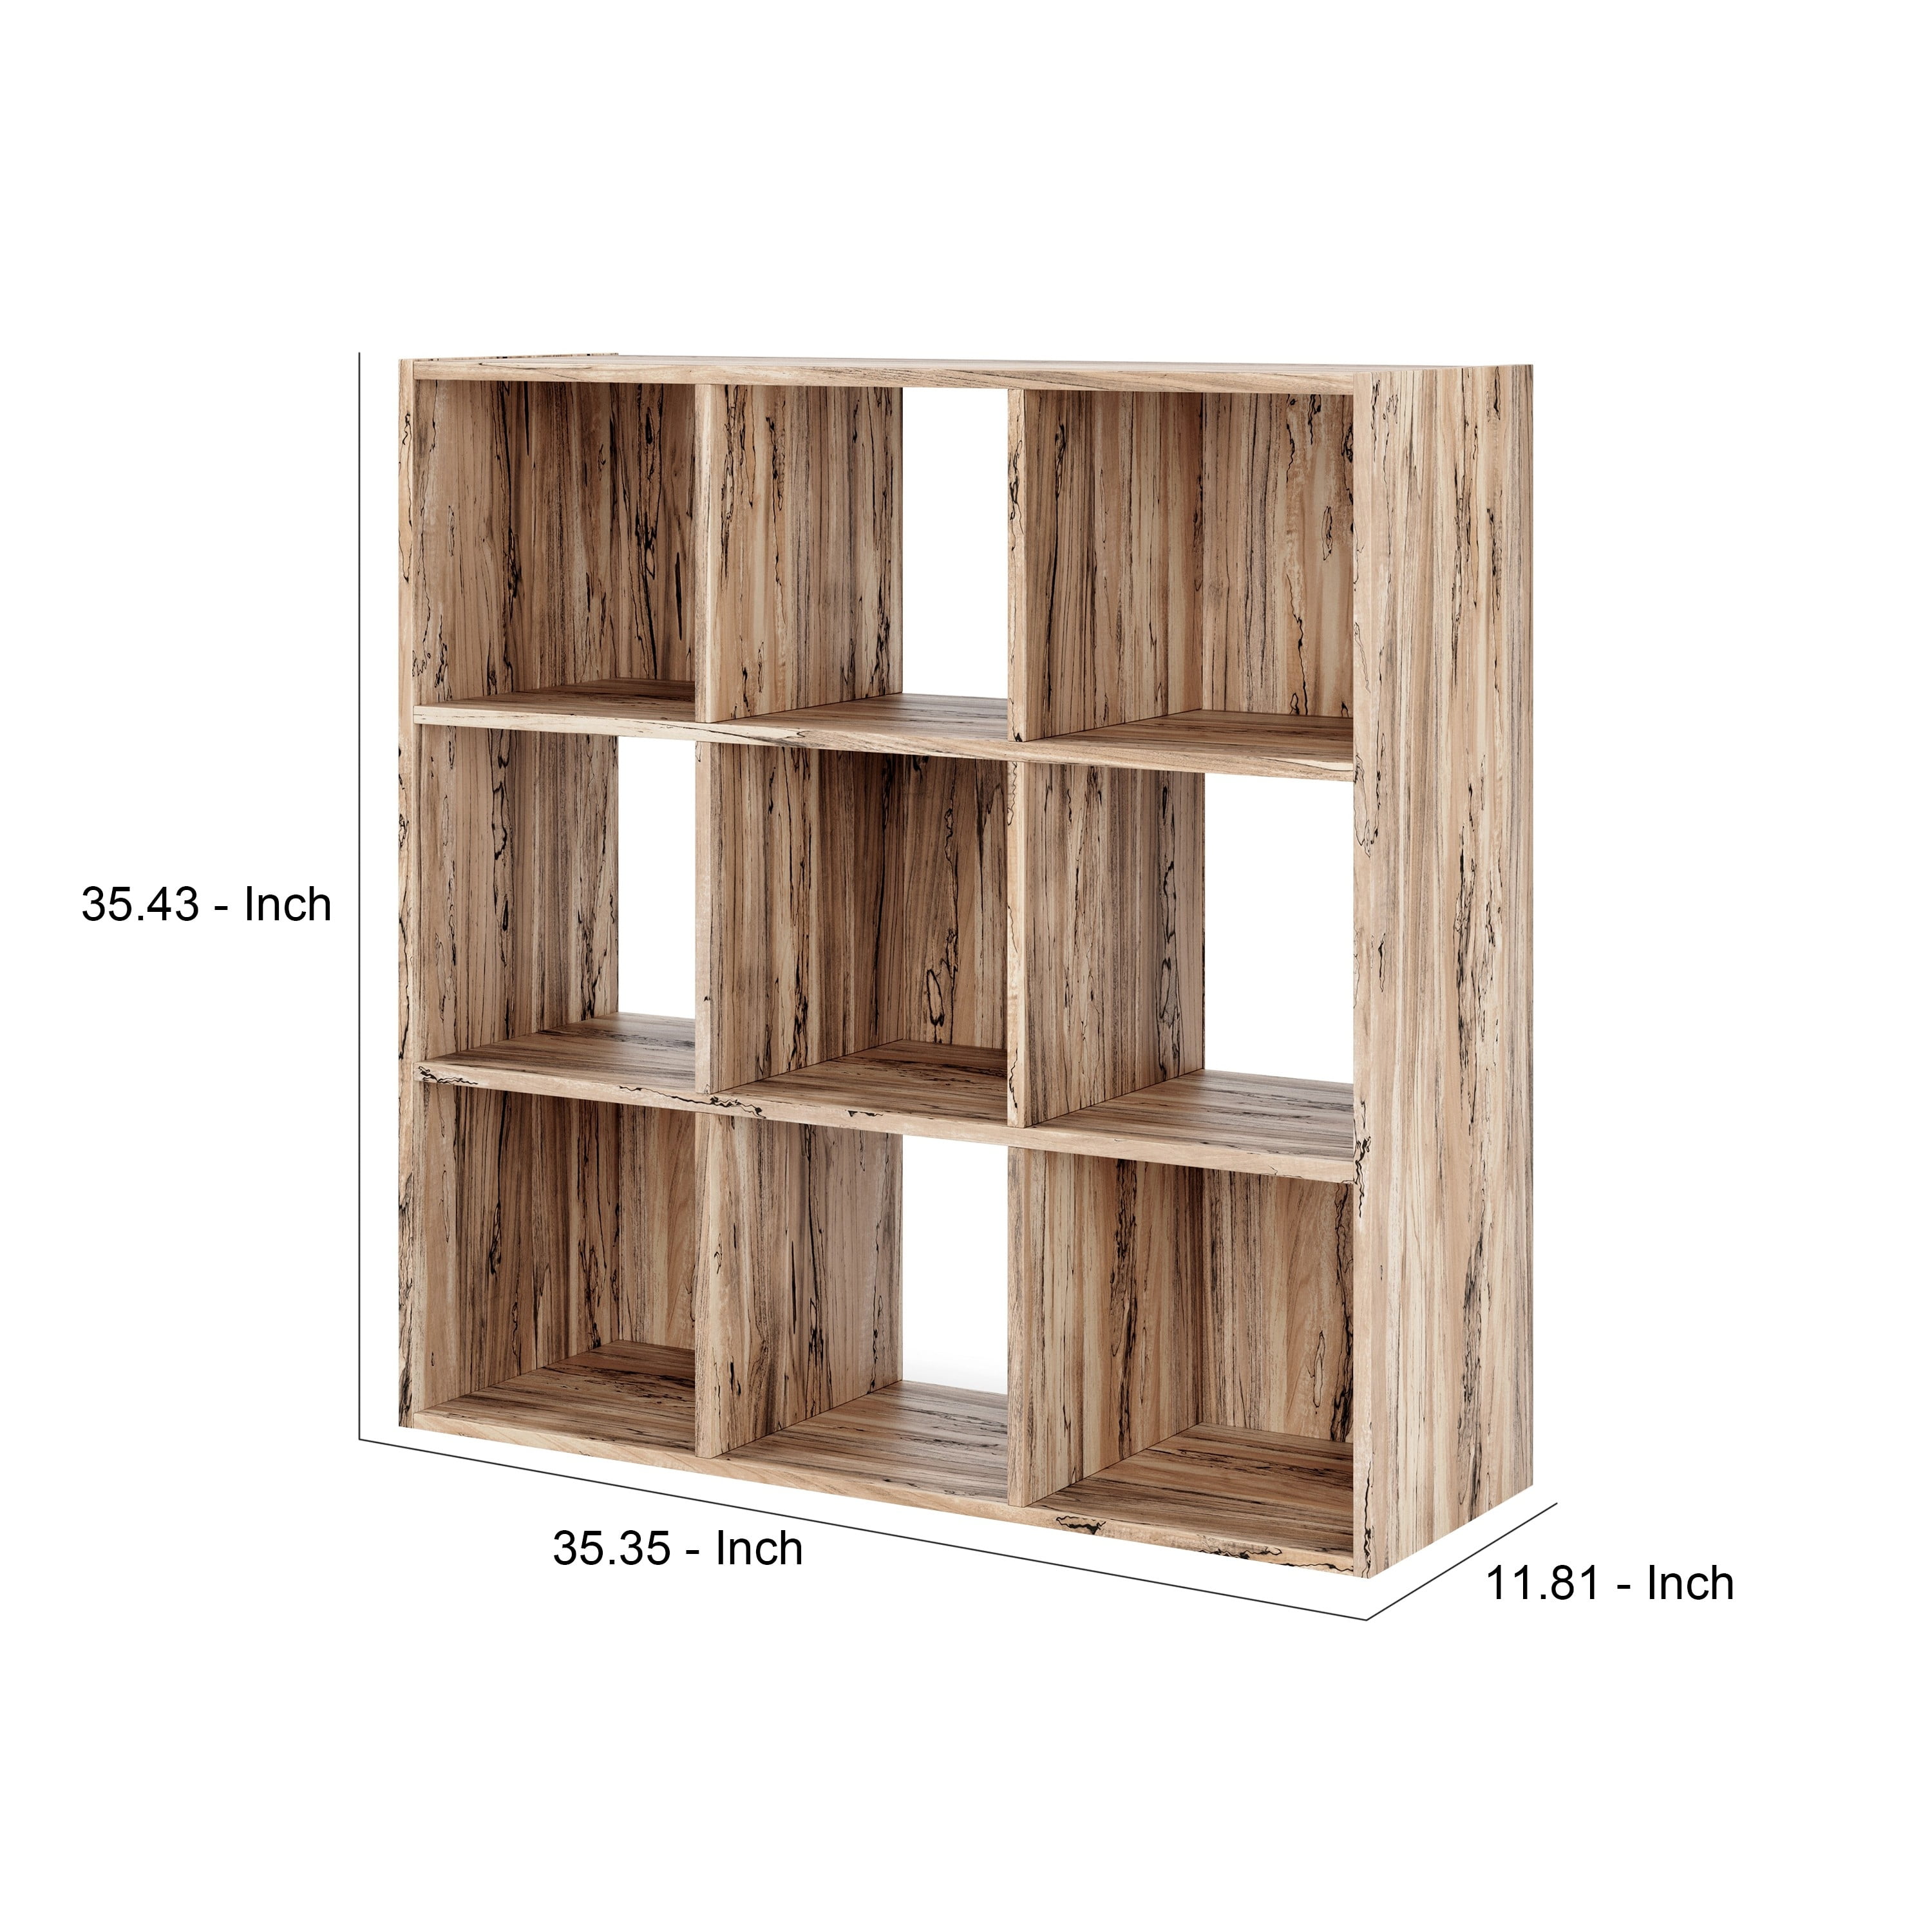 marymarygardens Rustic Wooden Storage Rack With 9 Numbered Compartments 